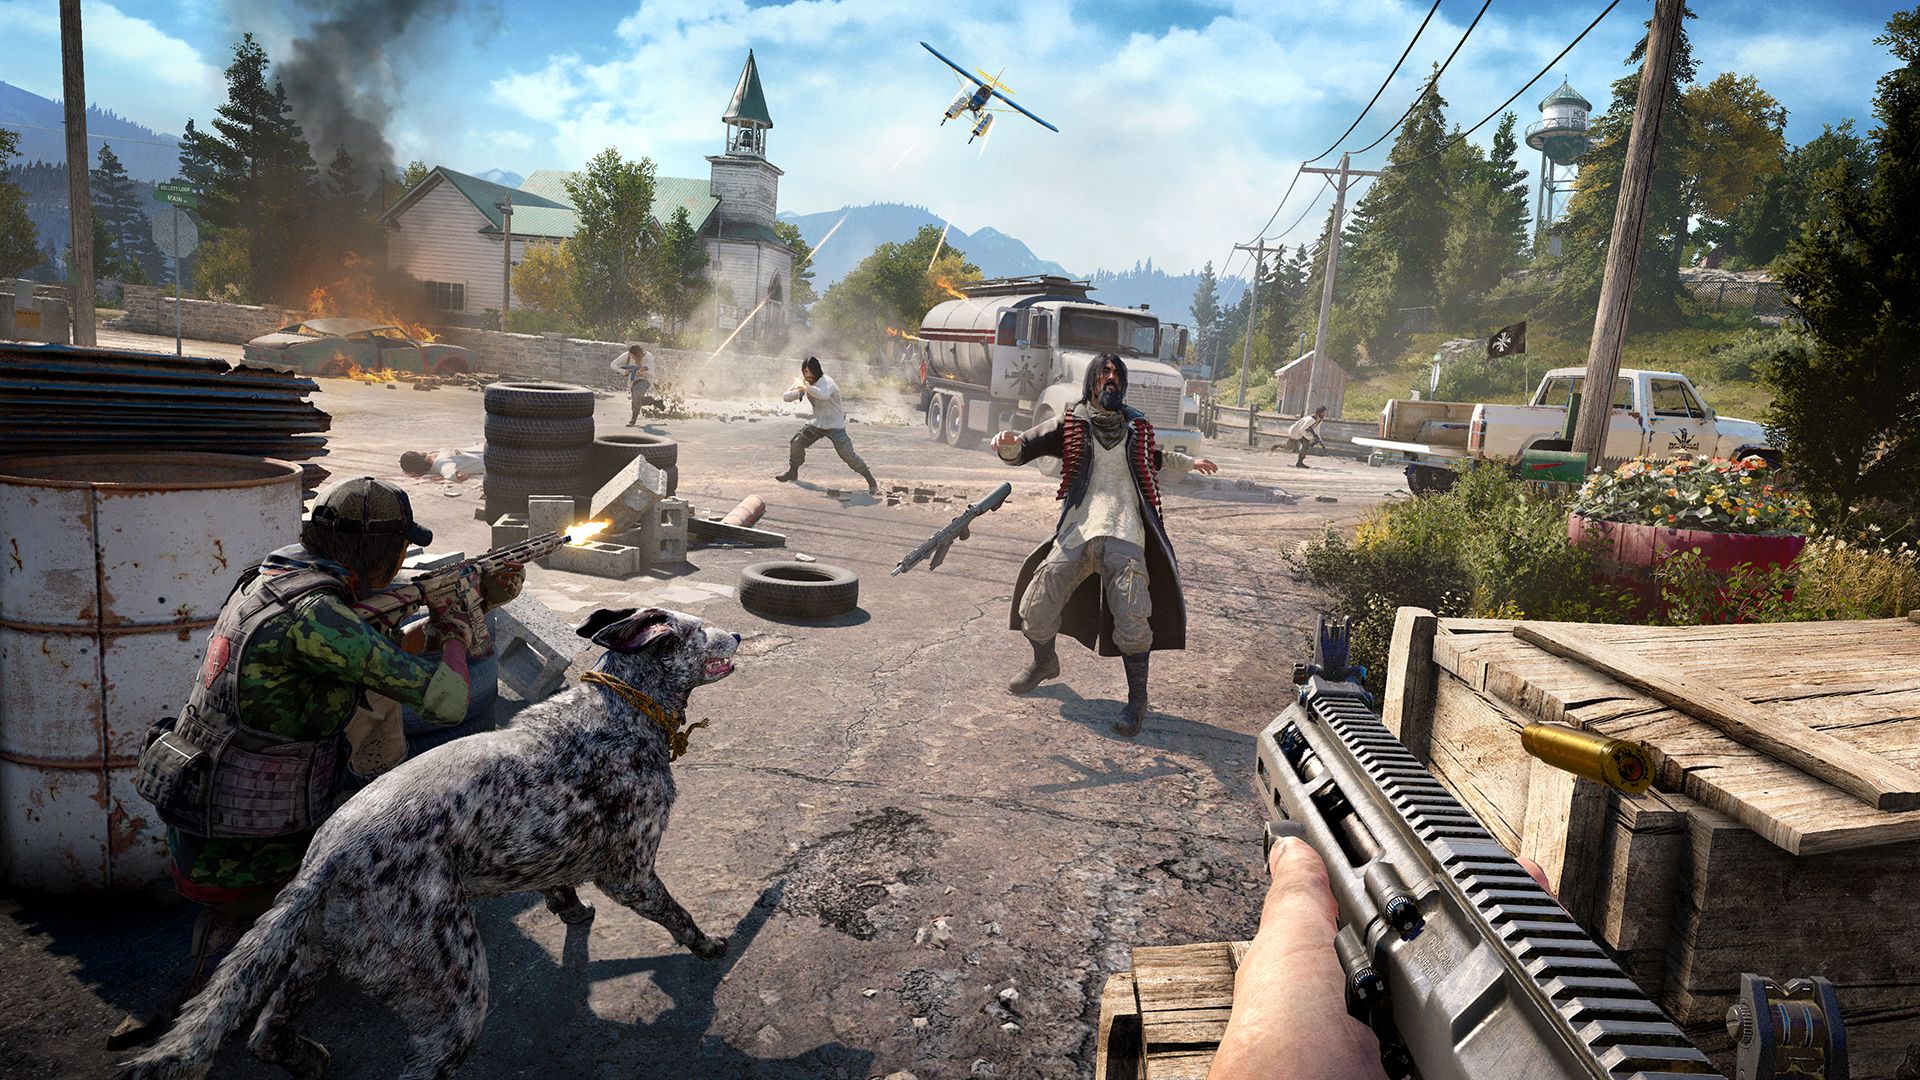 Far Cry 5 and New Dawn are now available on the Stadia Store with heavy  discounts for Pro subscribers